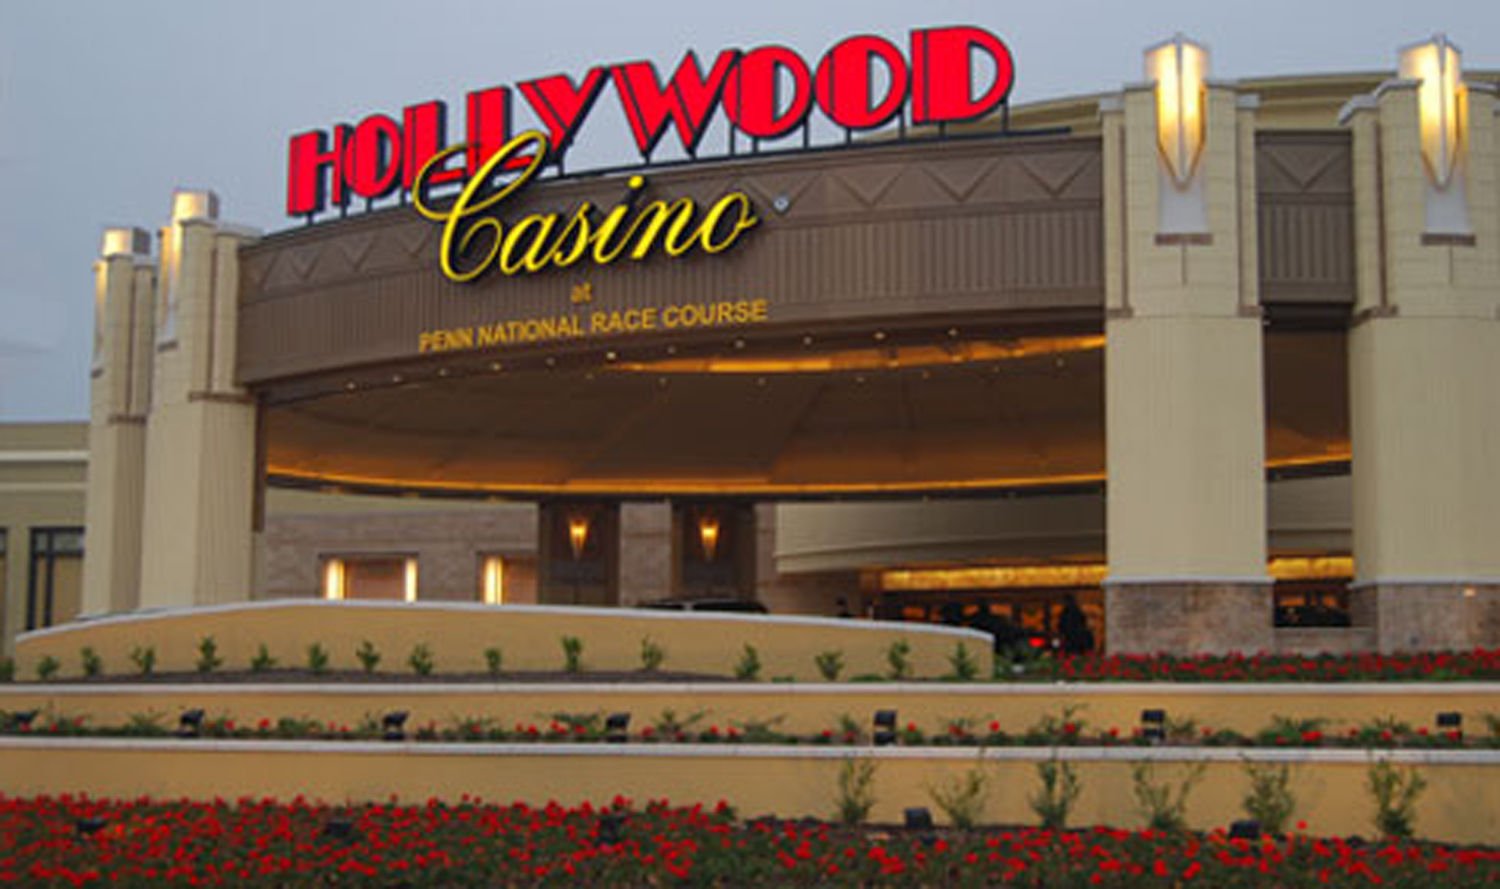 hollywood casino and penn national